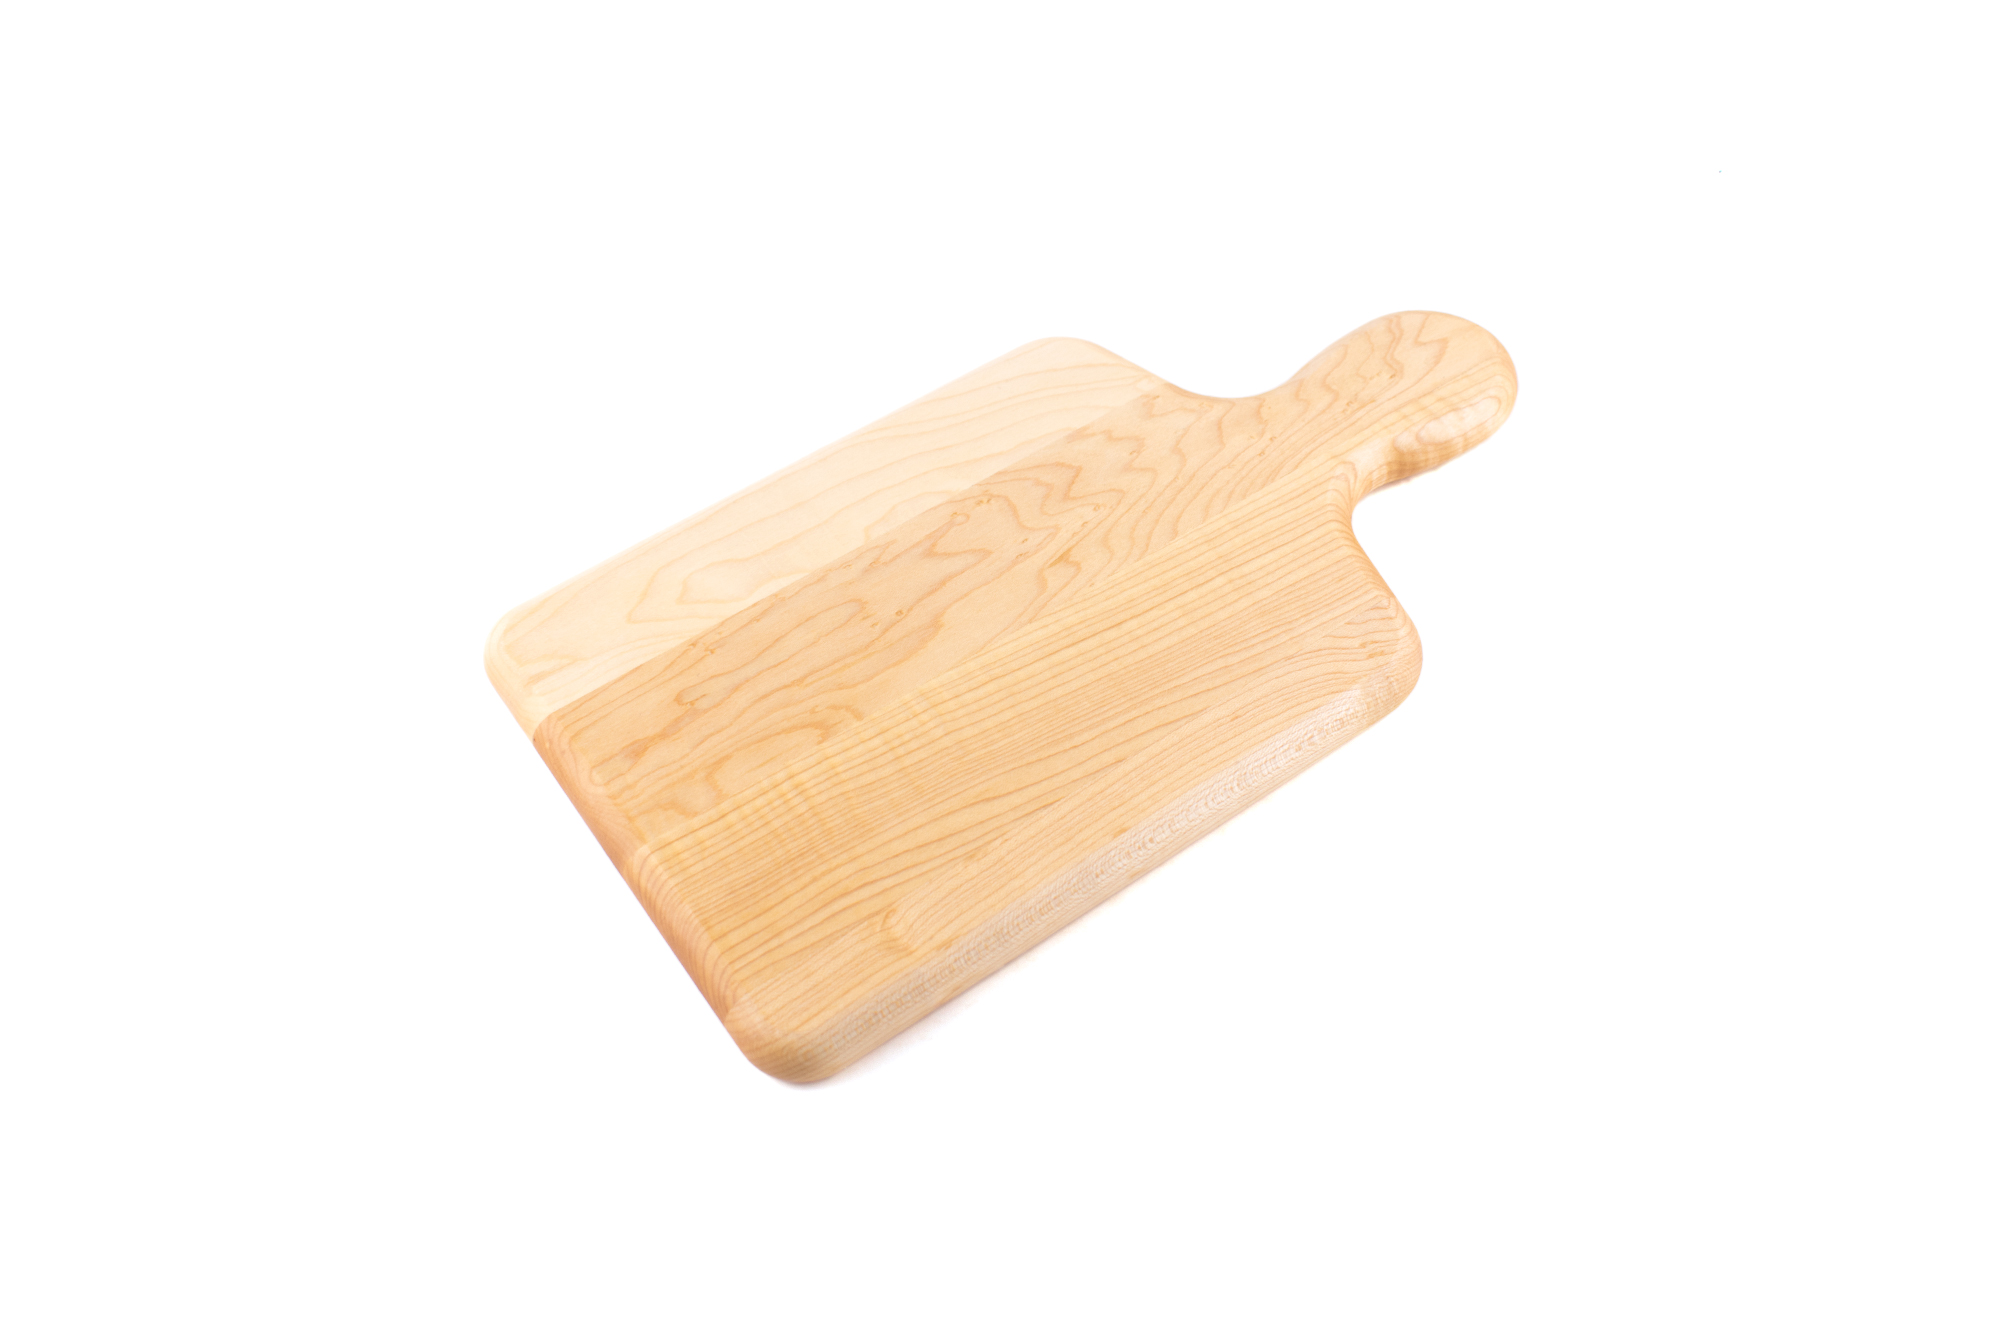 Maple wood cutting/serving board with handle and bullnose edges